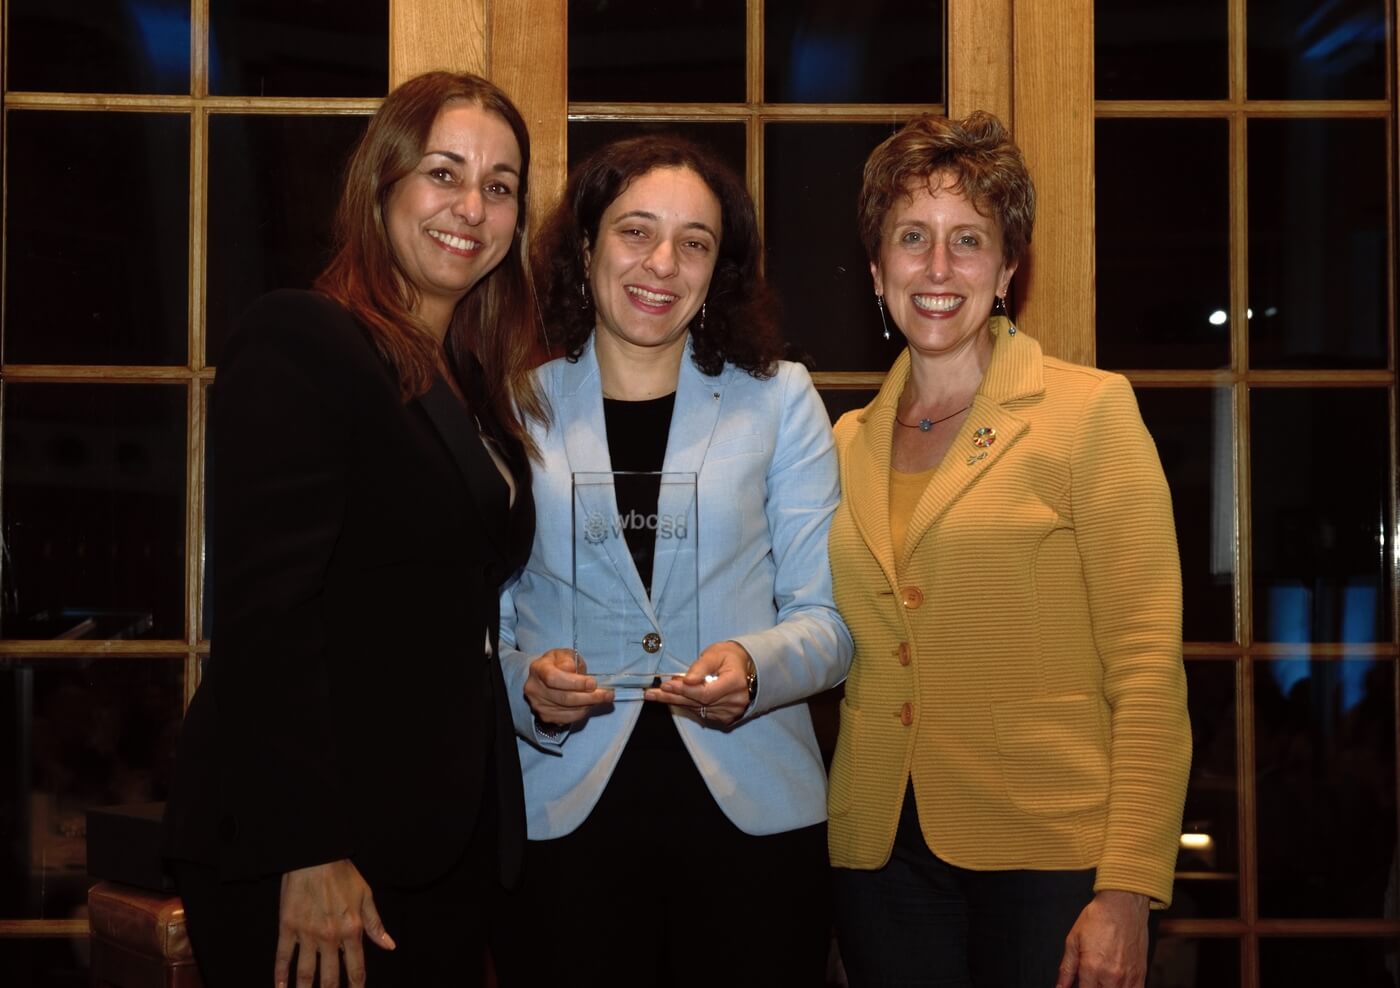 OCP Group's female leadership acknowledged by the WBCSD